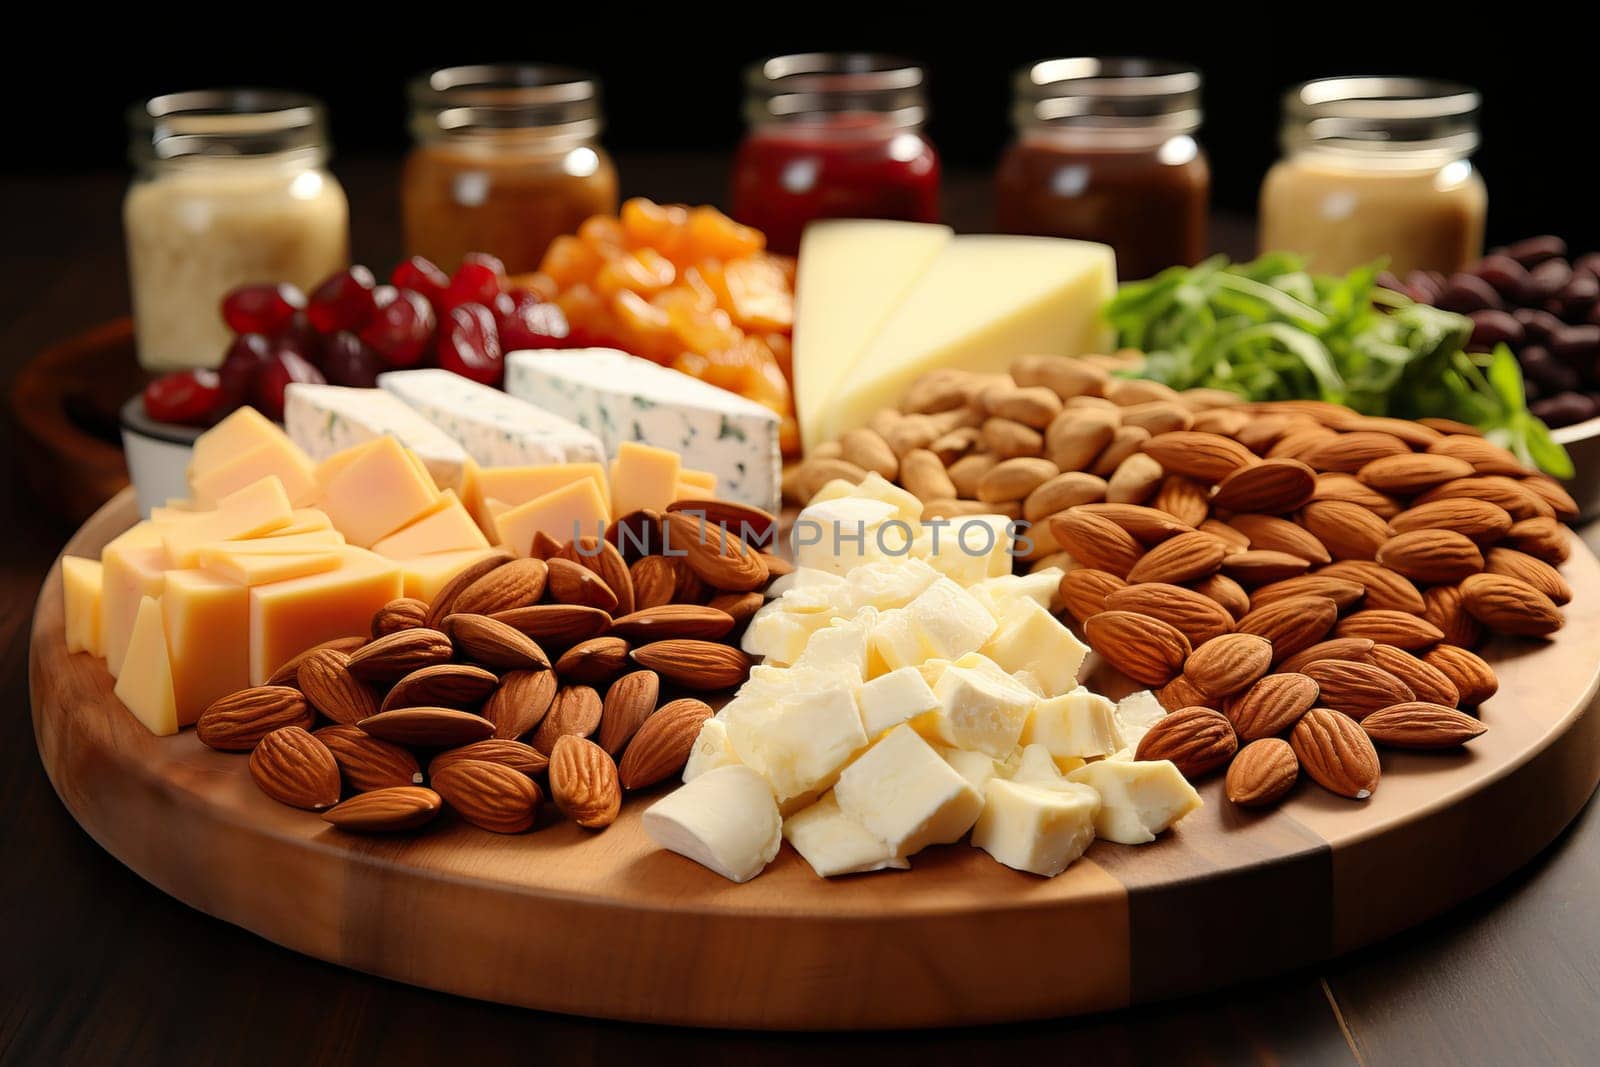 A variety of cheese and nuts and also with different cheese sauces on a black background.